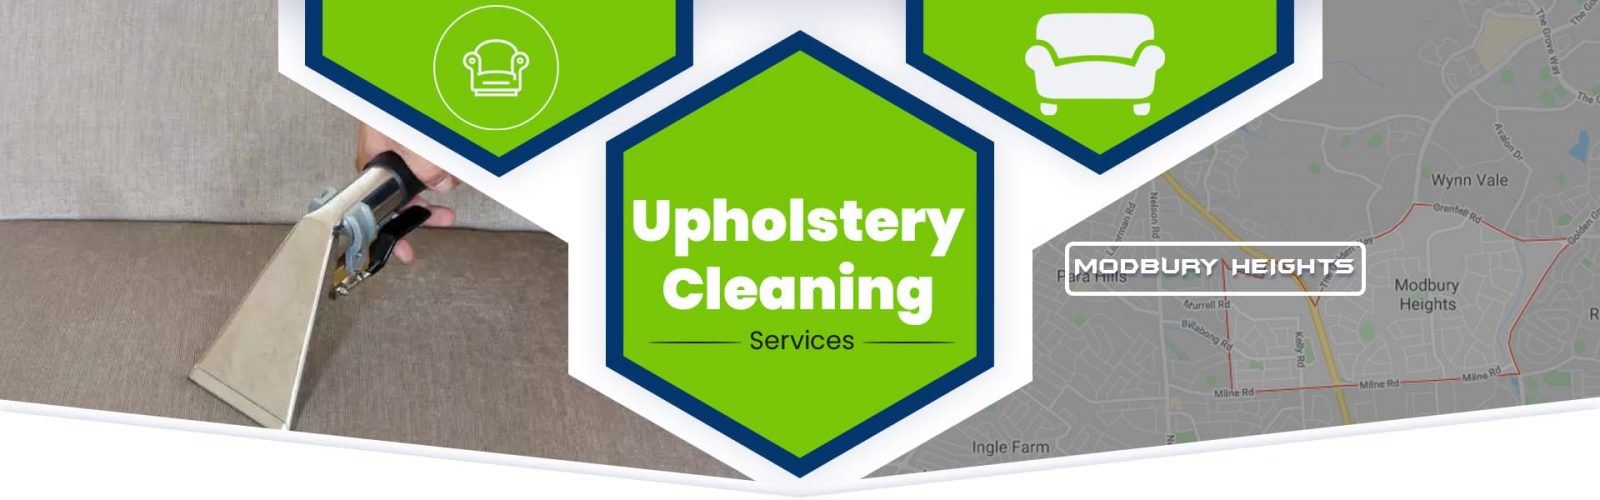 Upholstery Cleaning Modbury Heights